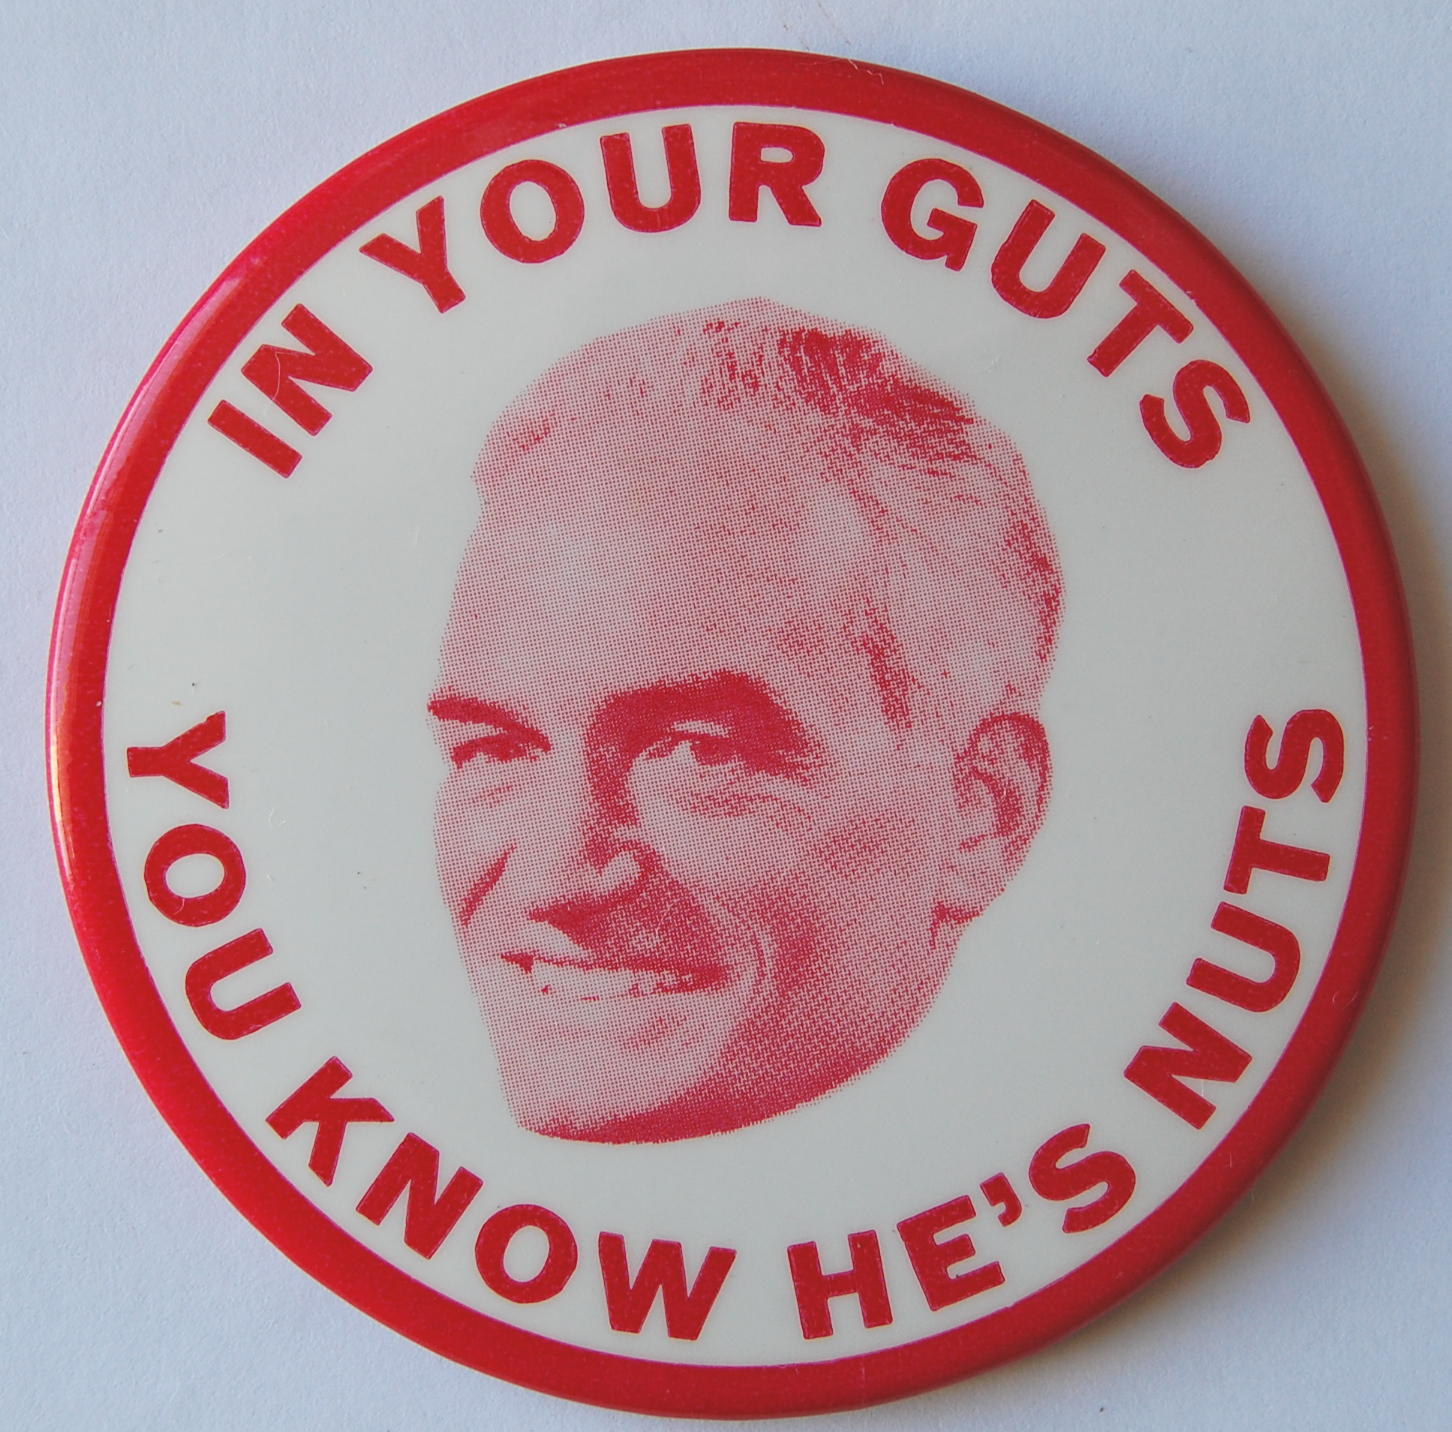 Barry Goldwater badge